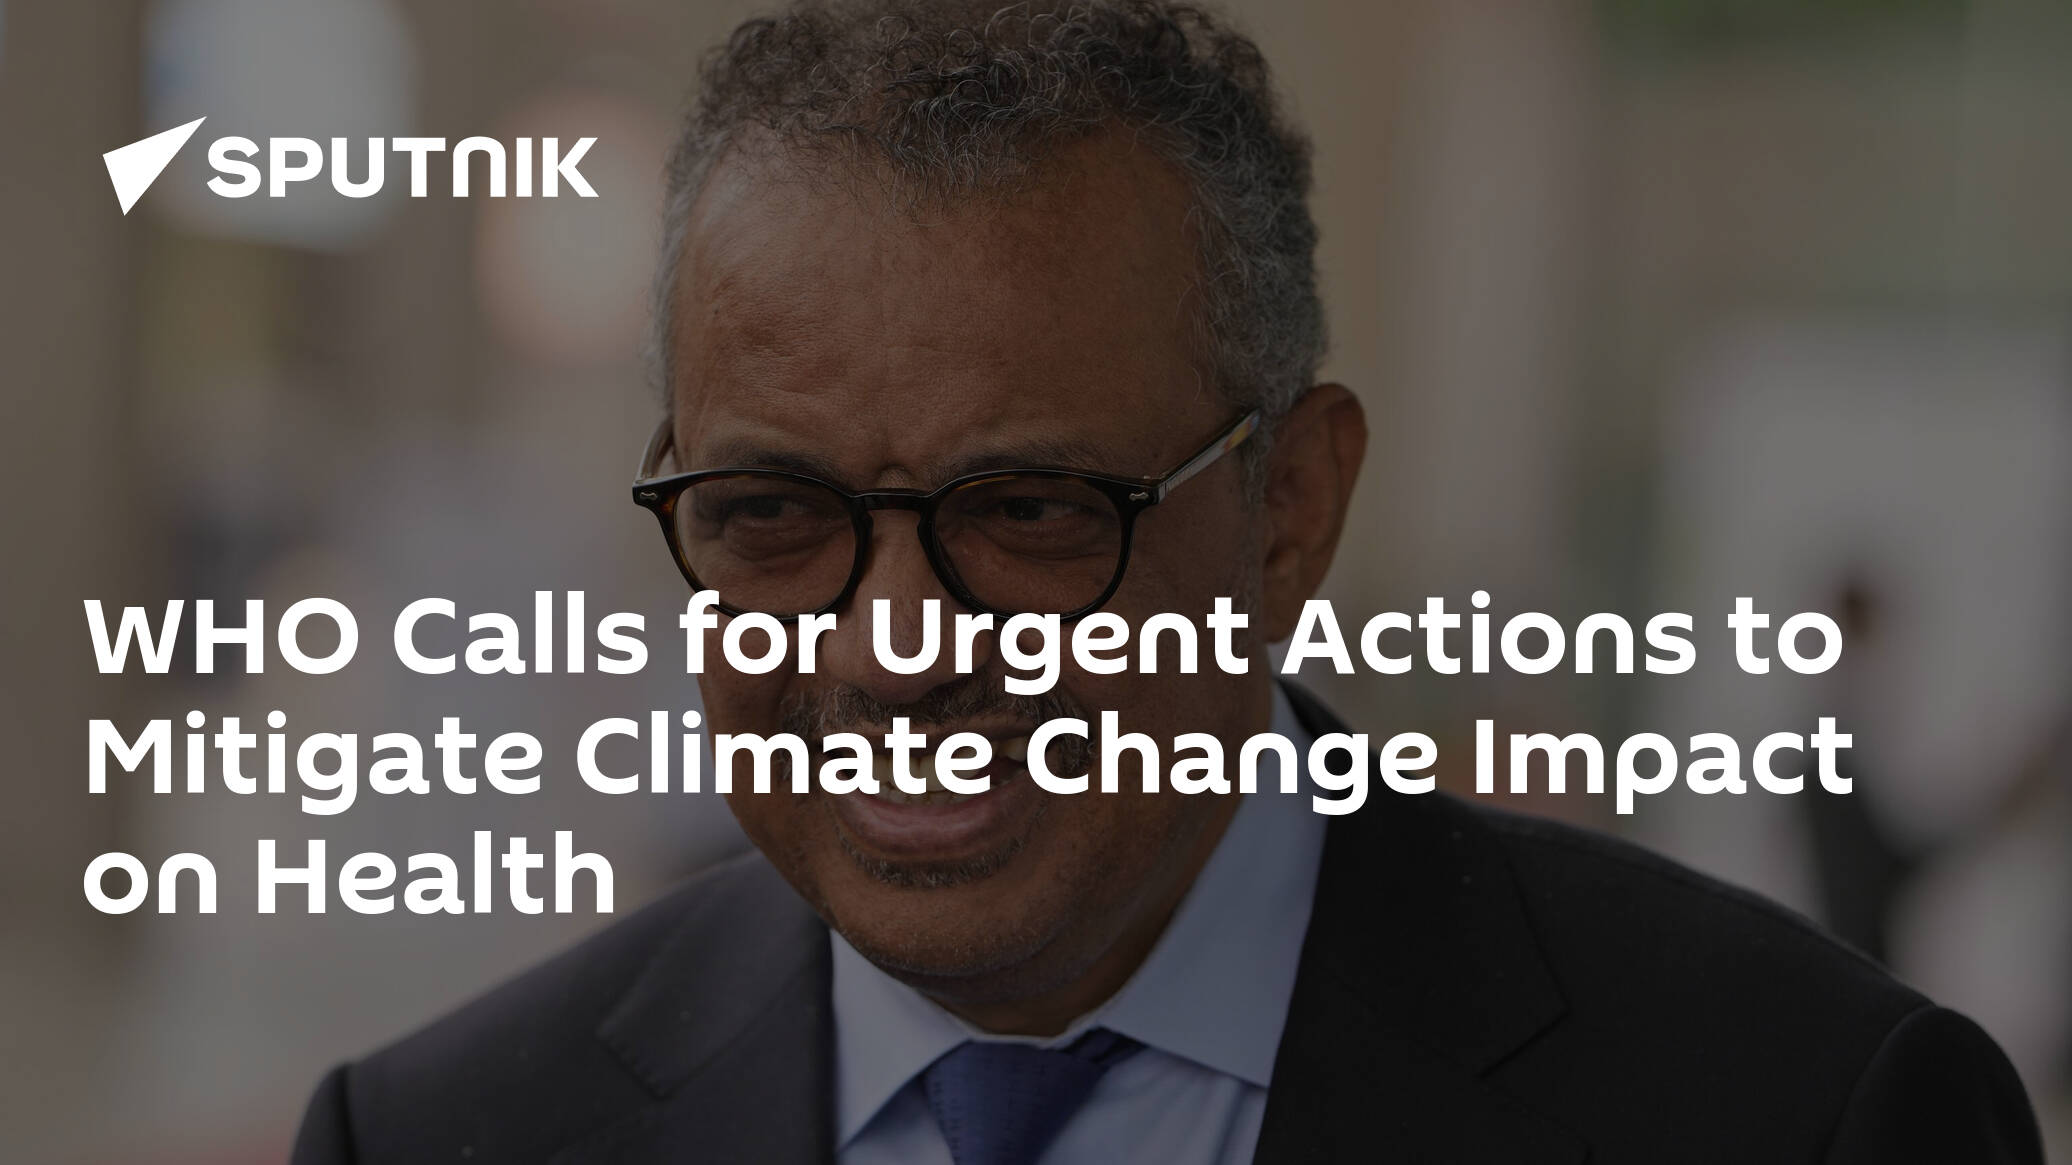 WHO Calls for Urgent Actions to Mitigate Climate Change Impact on Health